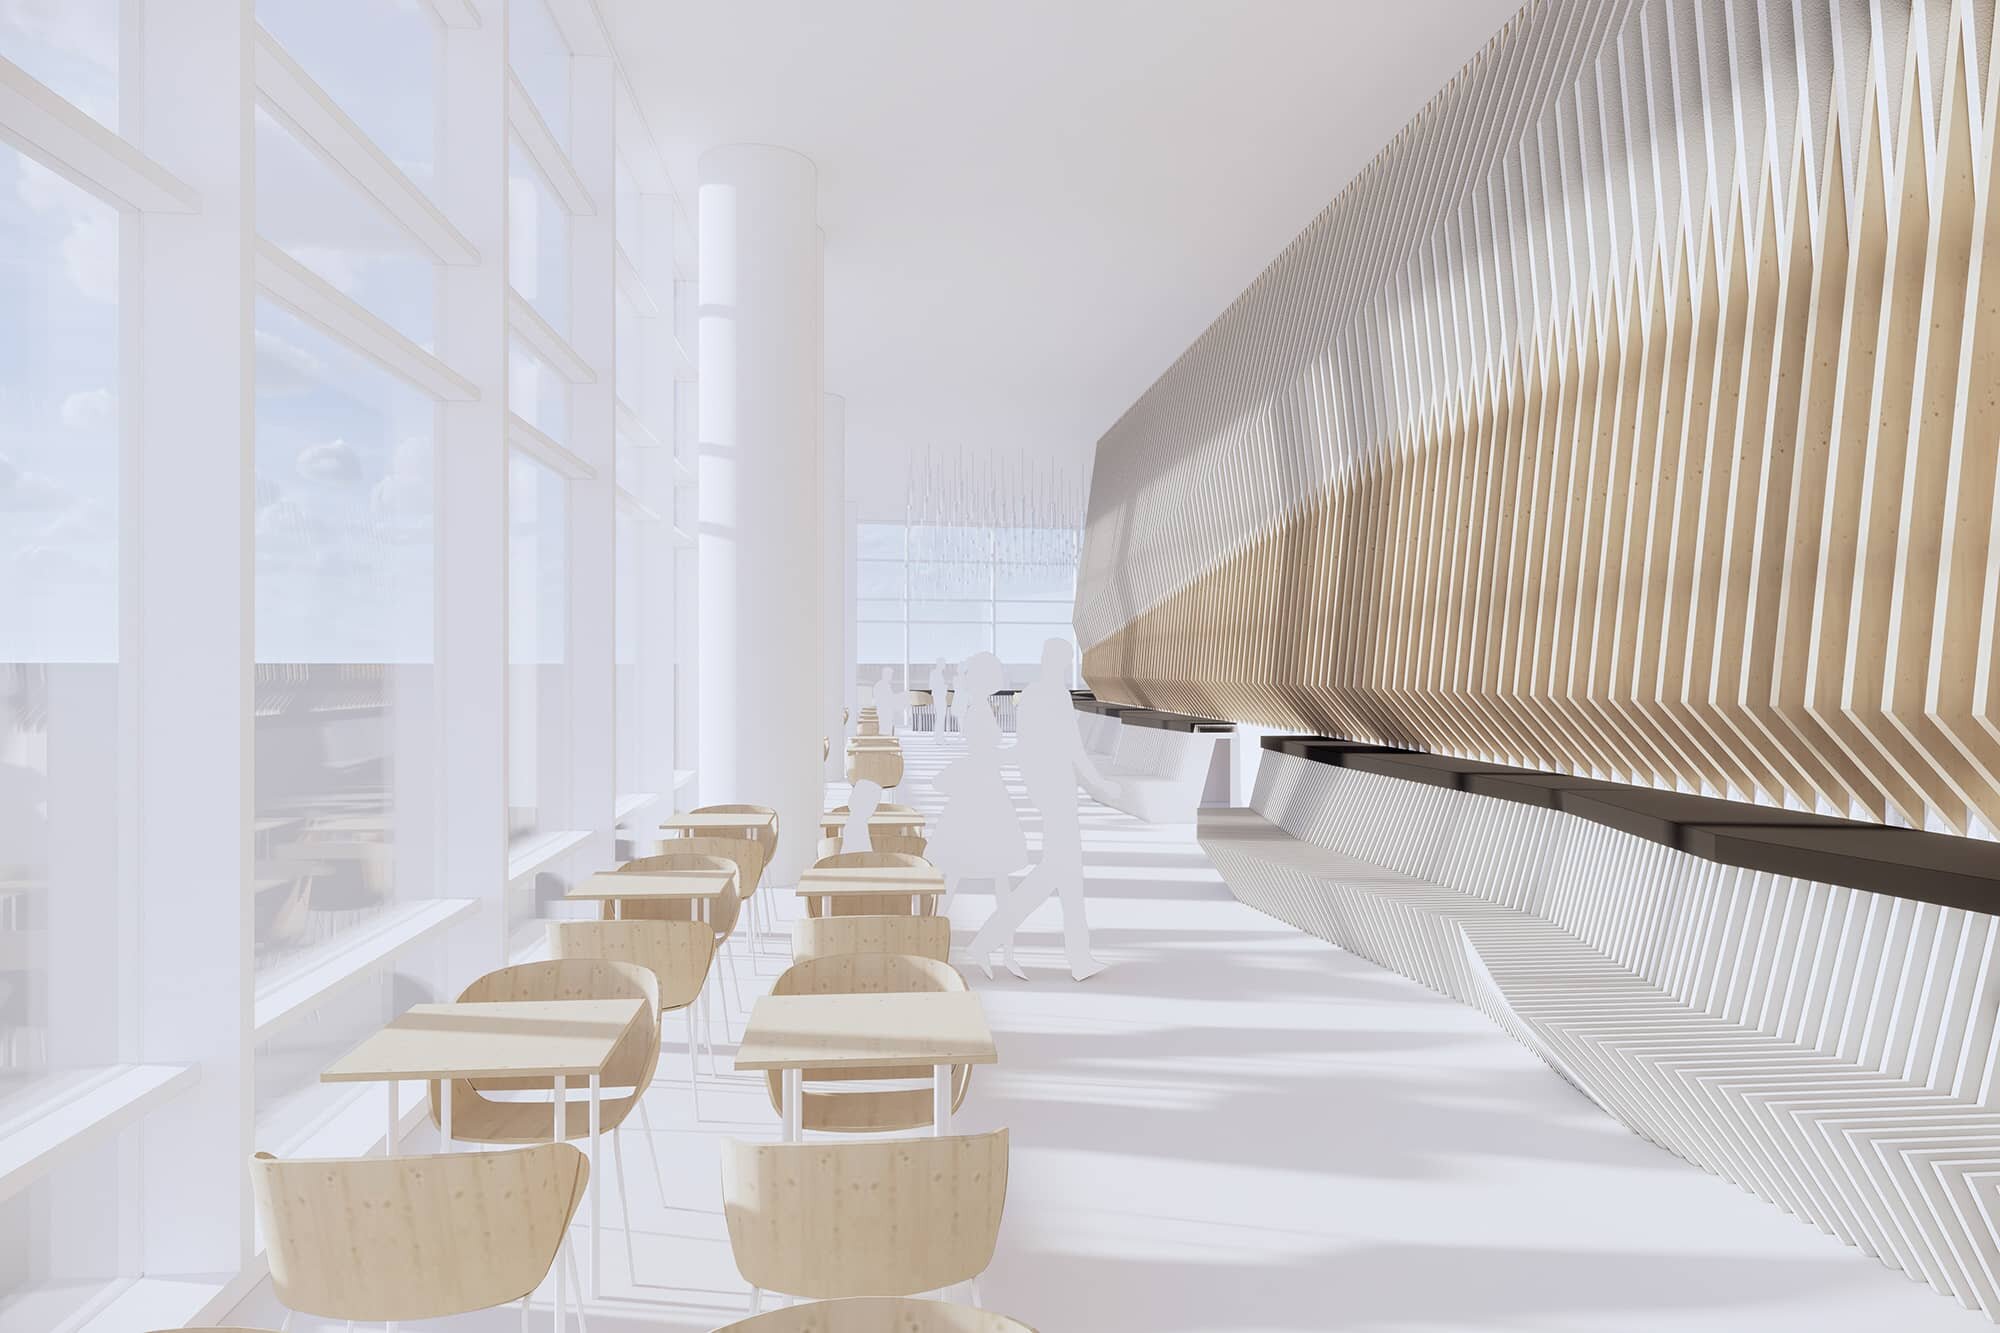 Airport Cafe design using parametric tools from Graphisoft and Rhino ... more